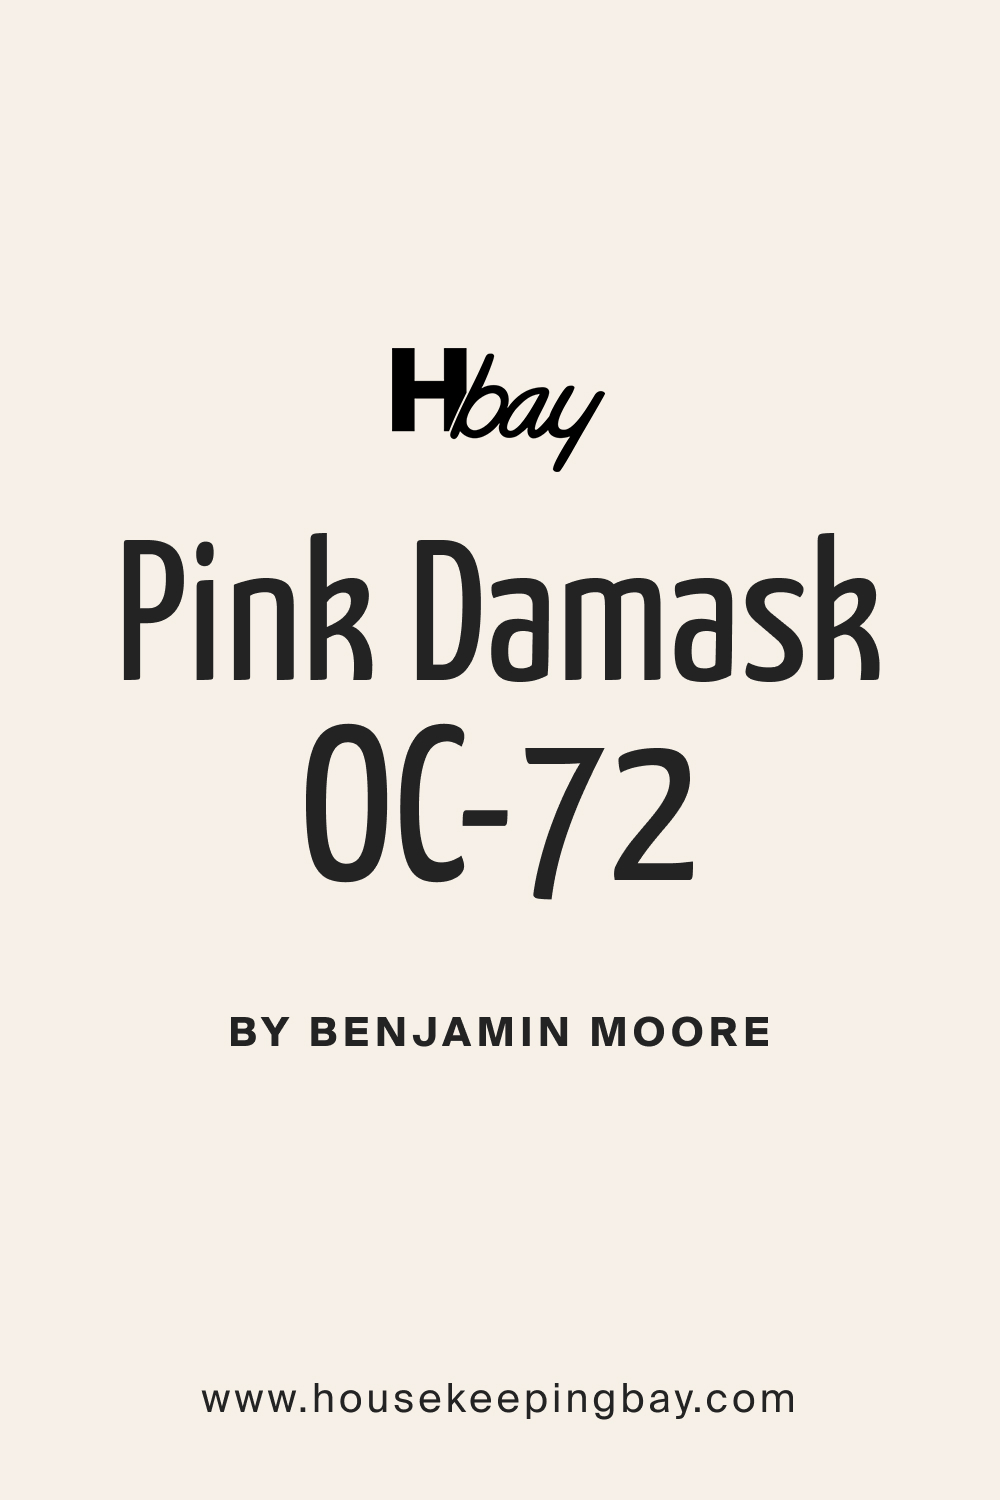 Pink Damask OC 72 Paint Color by Benjamin Moore